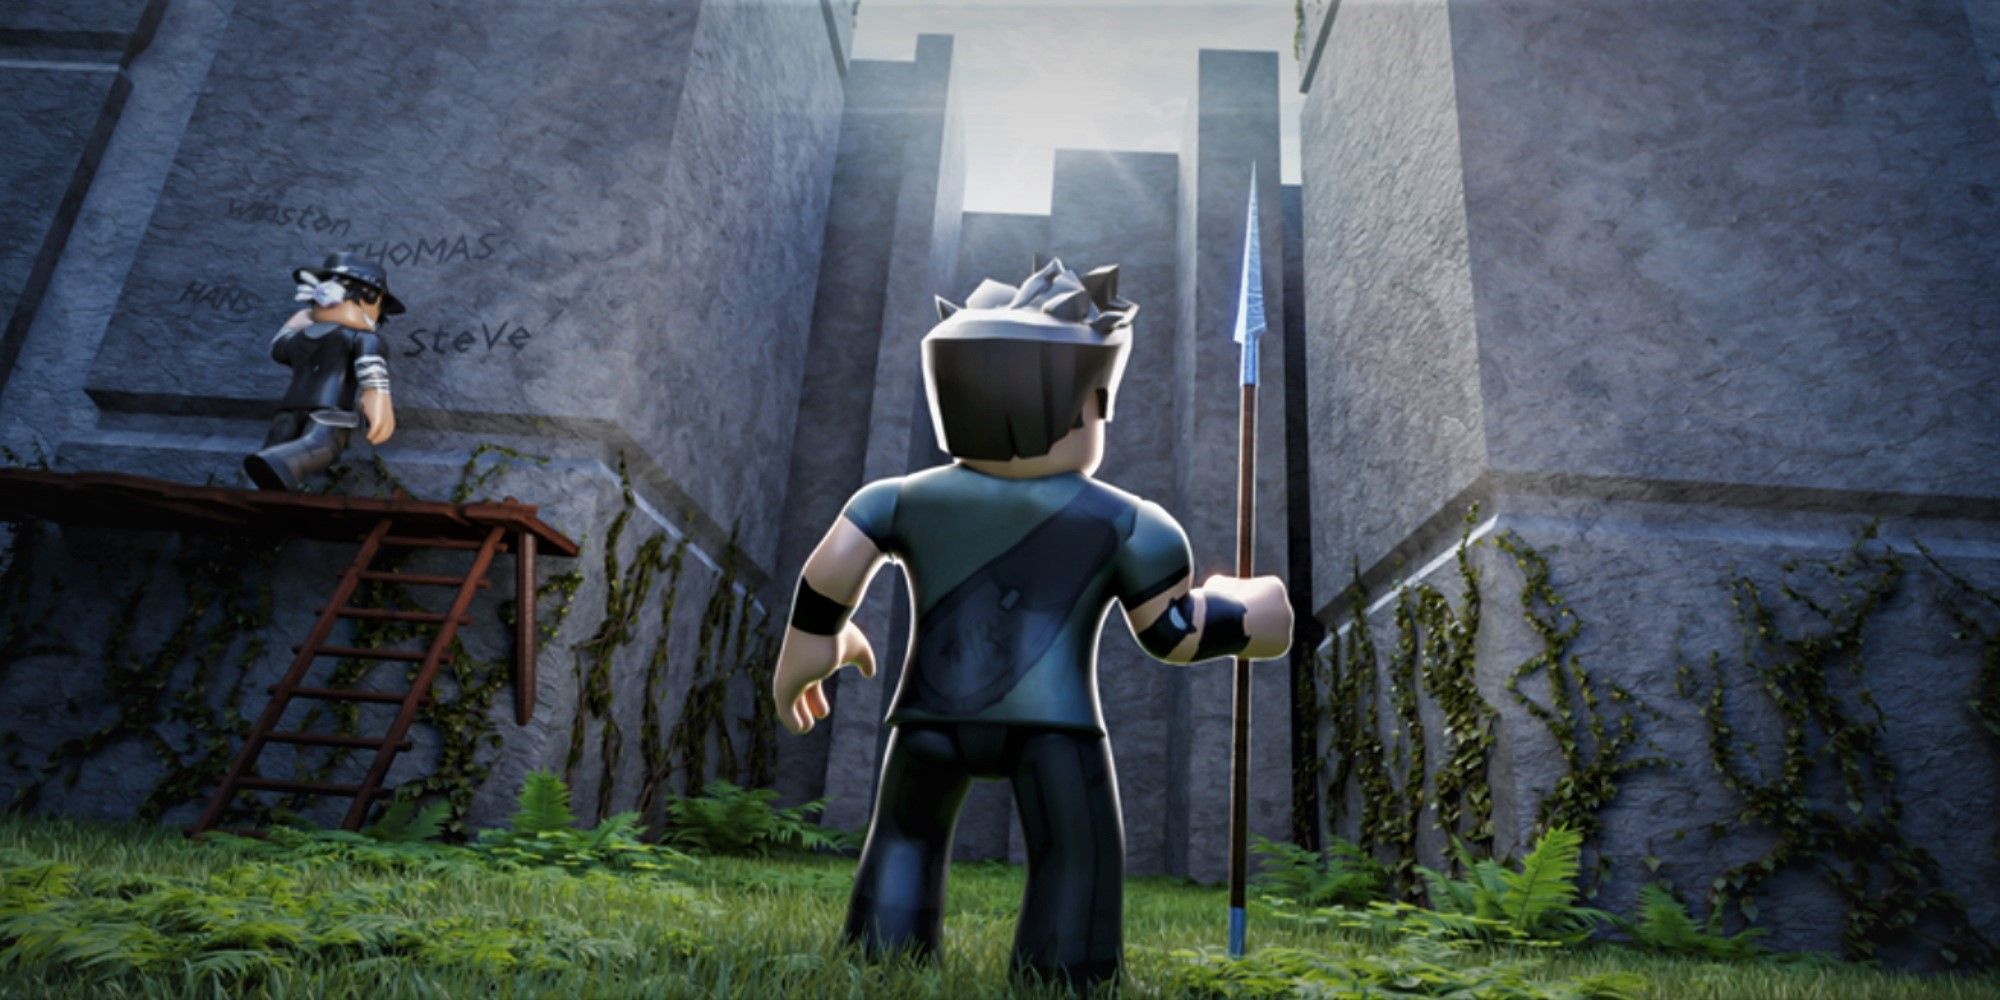 The Roblox character stands facing a maze with his back to us, while holding a spear